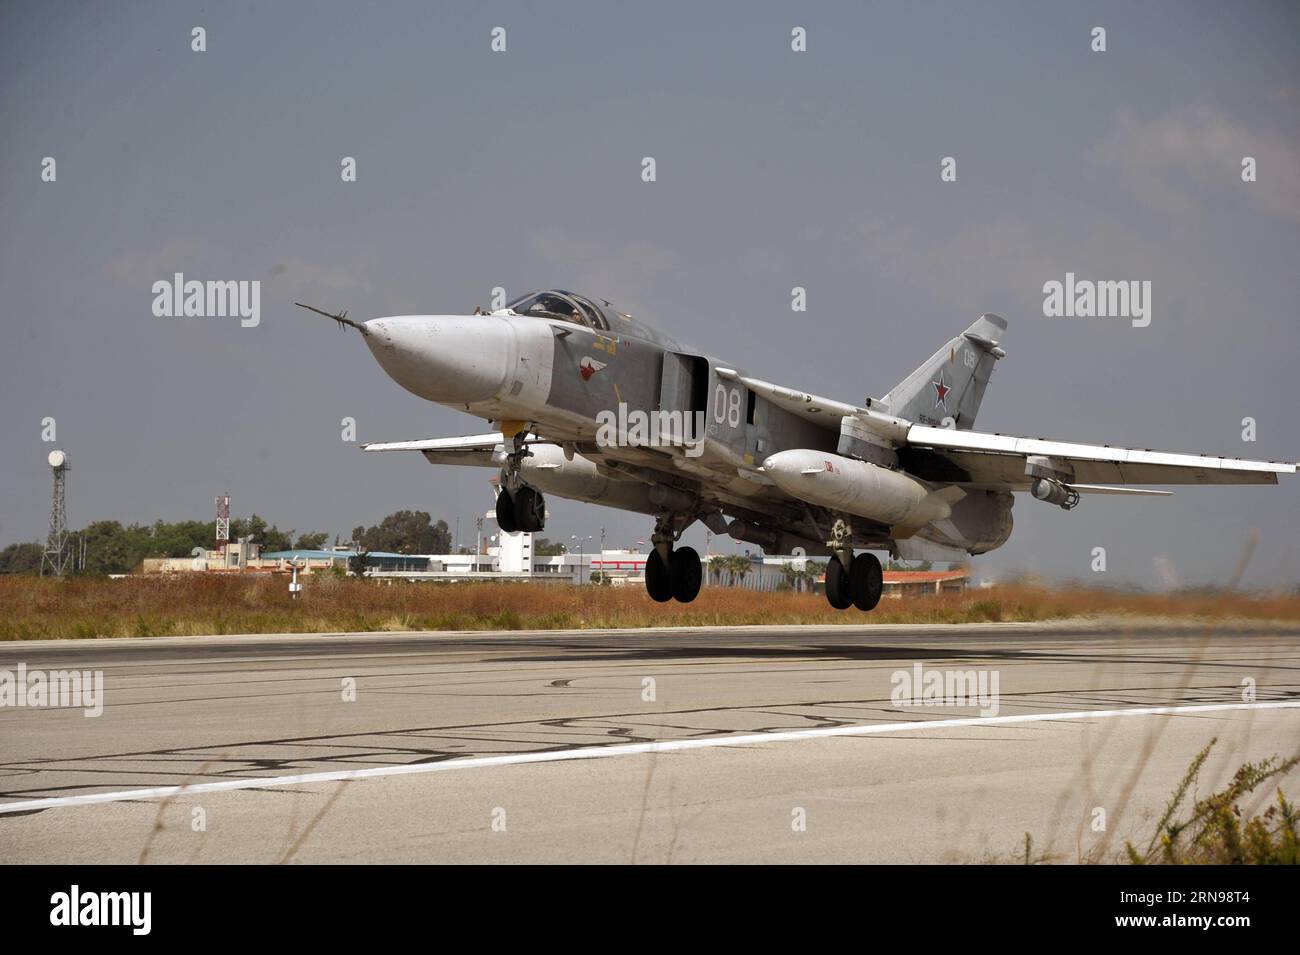 (151124) -- LATAKIA, Nov. 24, 2015 -- Photo taken on Oct. 21, 2015 shows Russian Sukhoi Su-24 taking off from the Hmeymim airbase in the Latakia province, Syria. The Russian Defense Ministry on Tuesday confirmed that a Su-24 warplane crashed in Syria. Sputnik) (zjy) SYRIA-RUSSIA-SU-24-DOWN DaixTianfang PUBLICATIONxNOTxINxCHN   151124 Latakia Nov 24 2015 Photo Taken ON OCT 21 2015 Shows Russian Sukhoi SU 24 Taking off from The Hmeymim Airbase in The Latakia Province Syria The Russian Defense Ministry ON Tuesday confirmed Thatcher a SU 24 Warplane Crashed in Syria Sputnik zjy Syria Russia SU 24 Stock Photo